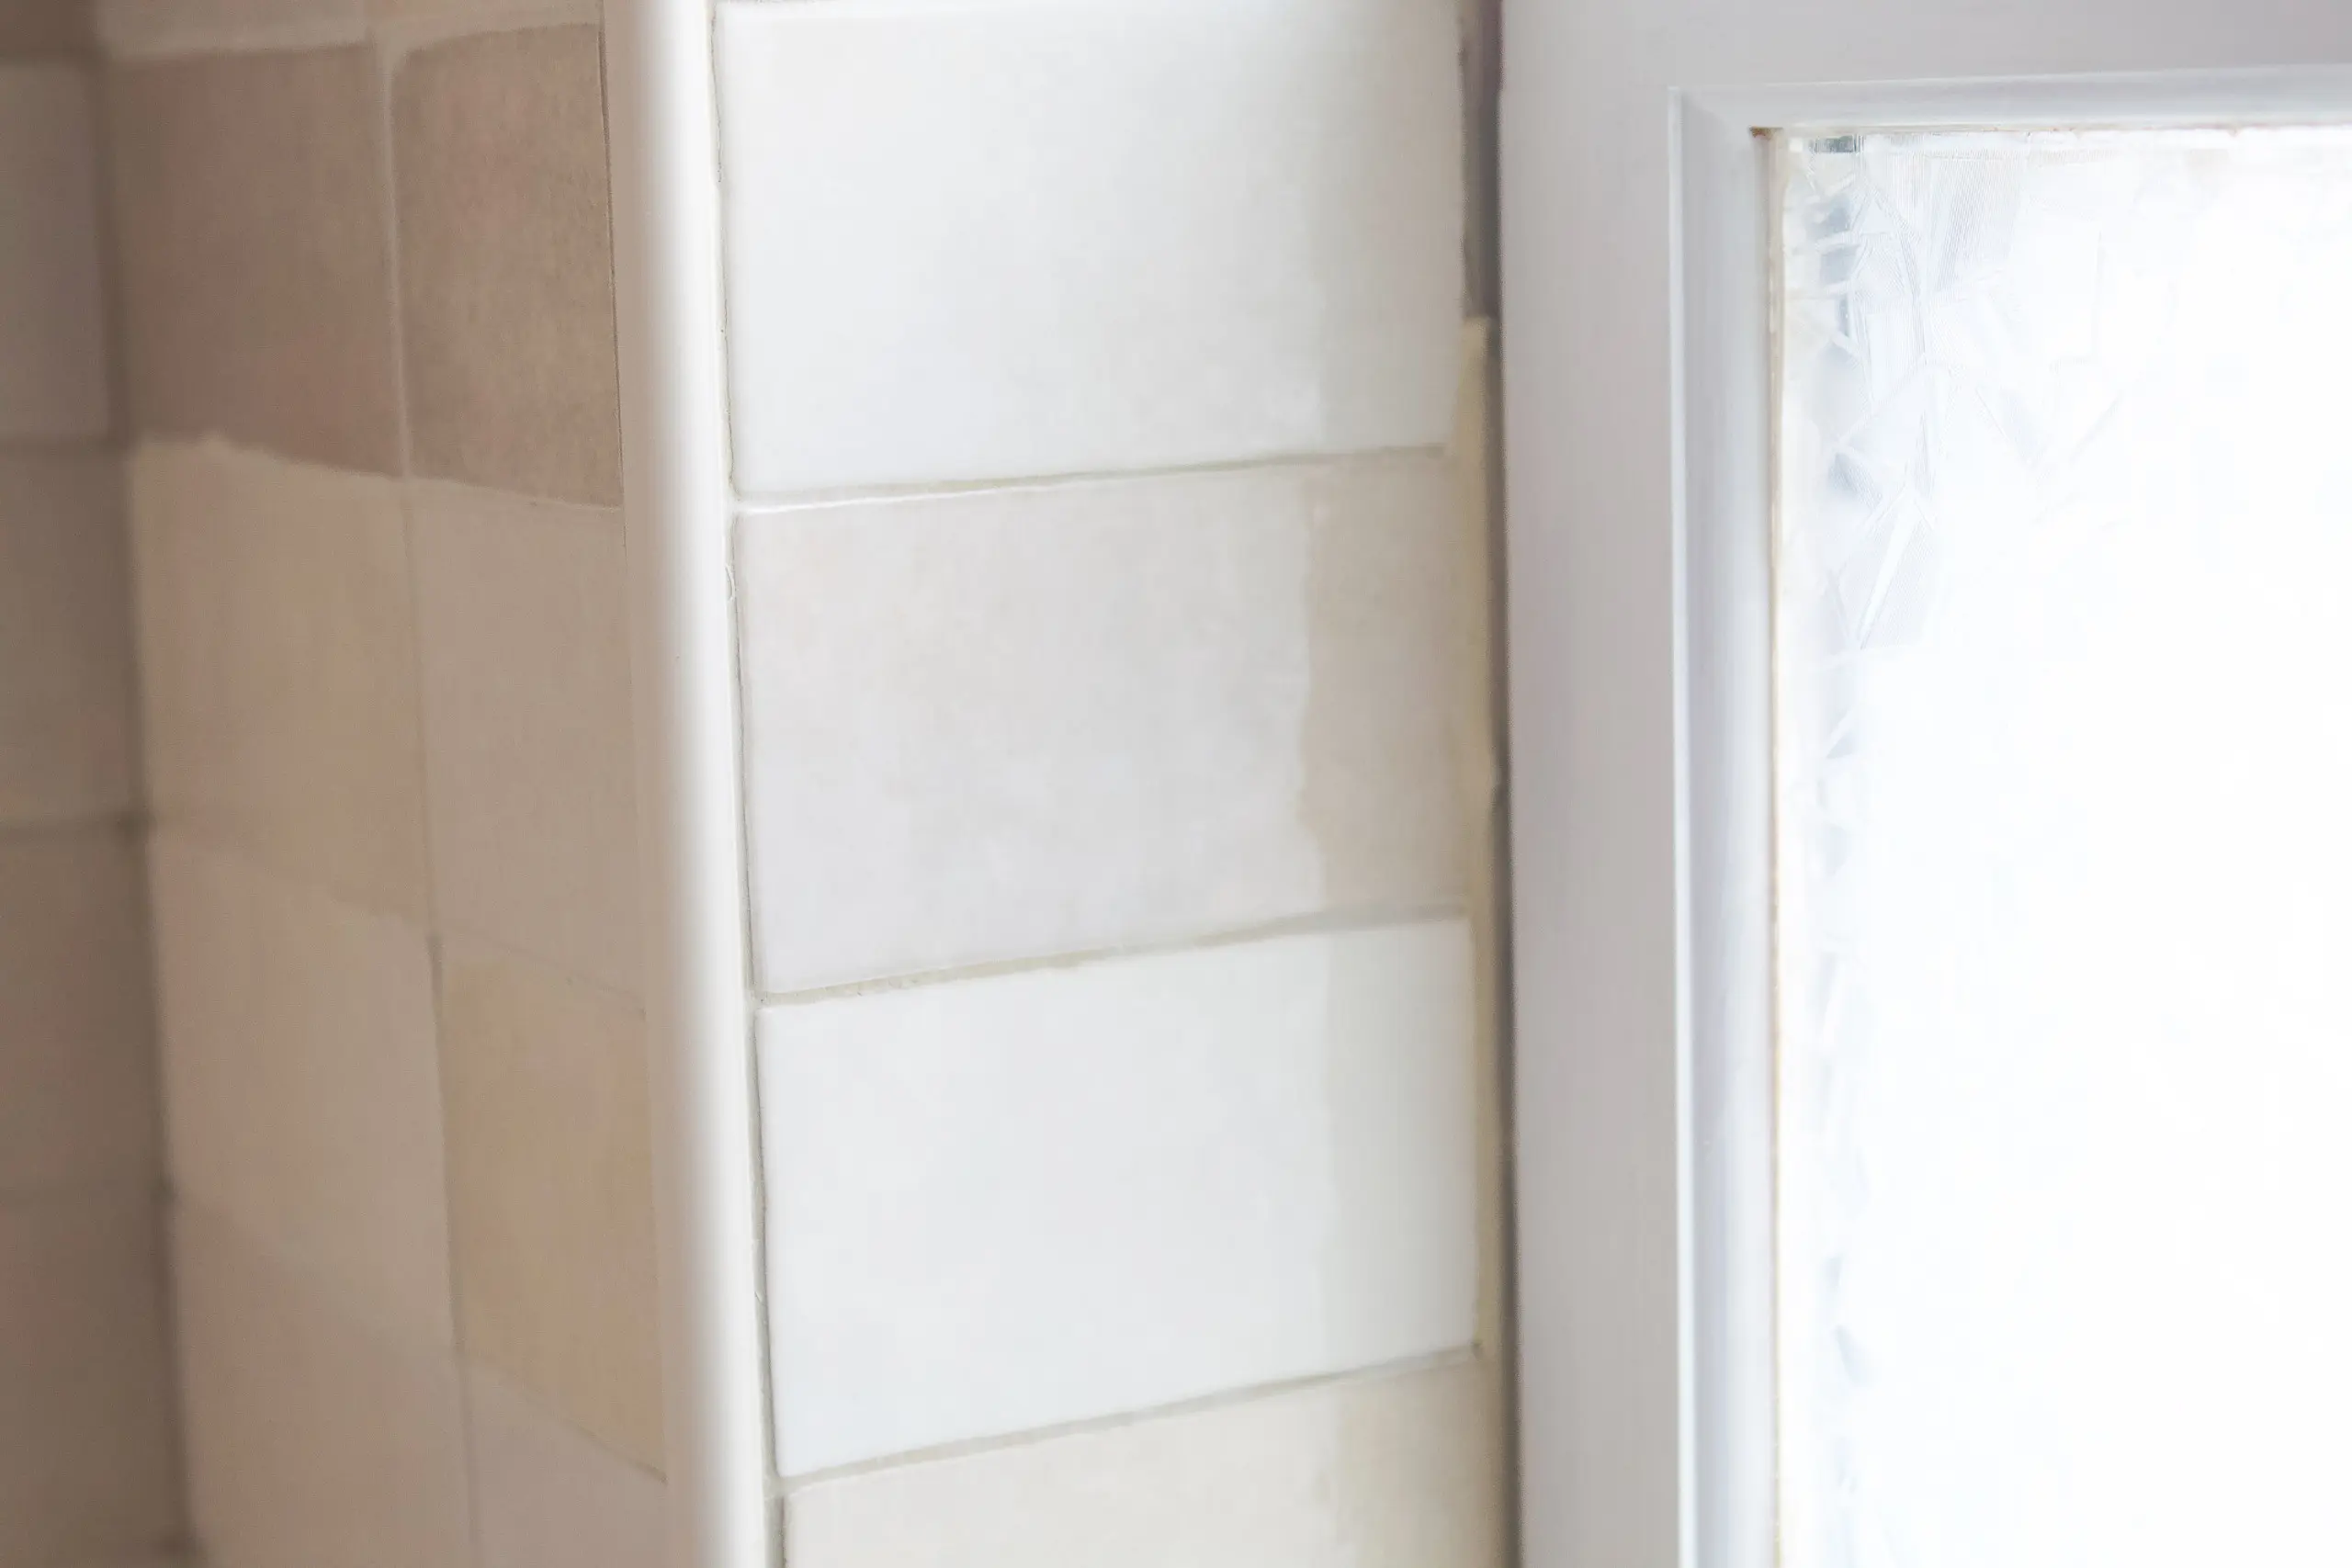 Using creme cloe tile in a shower